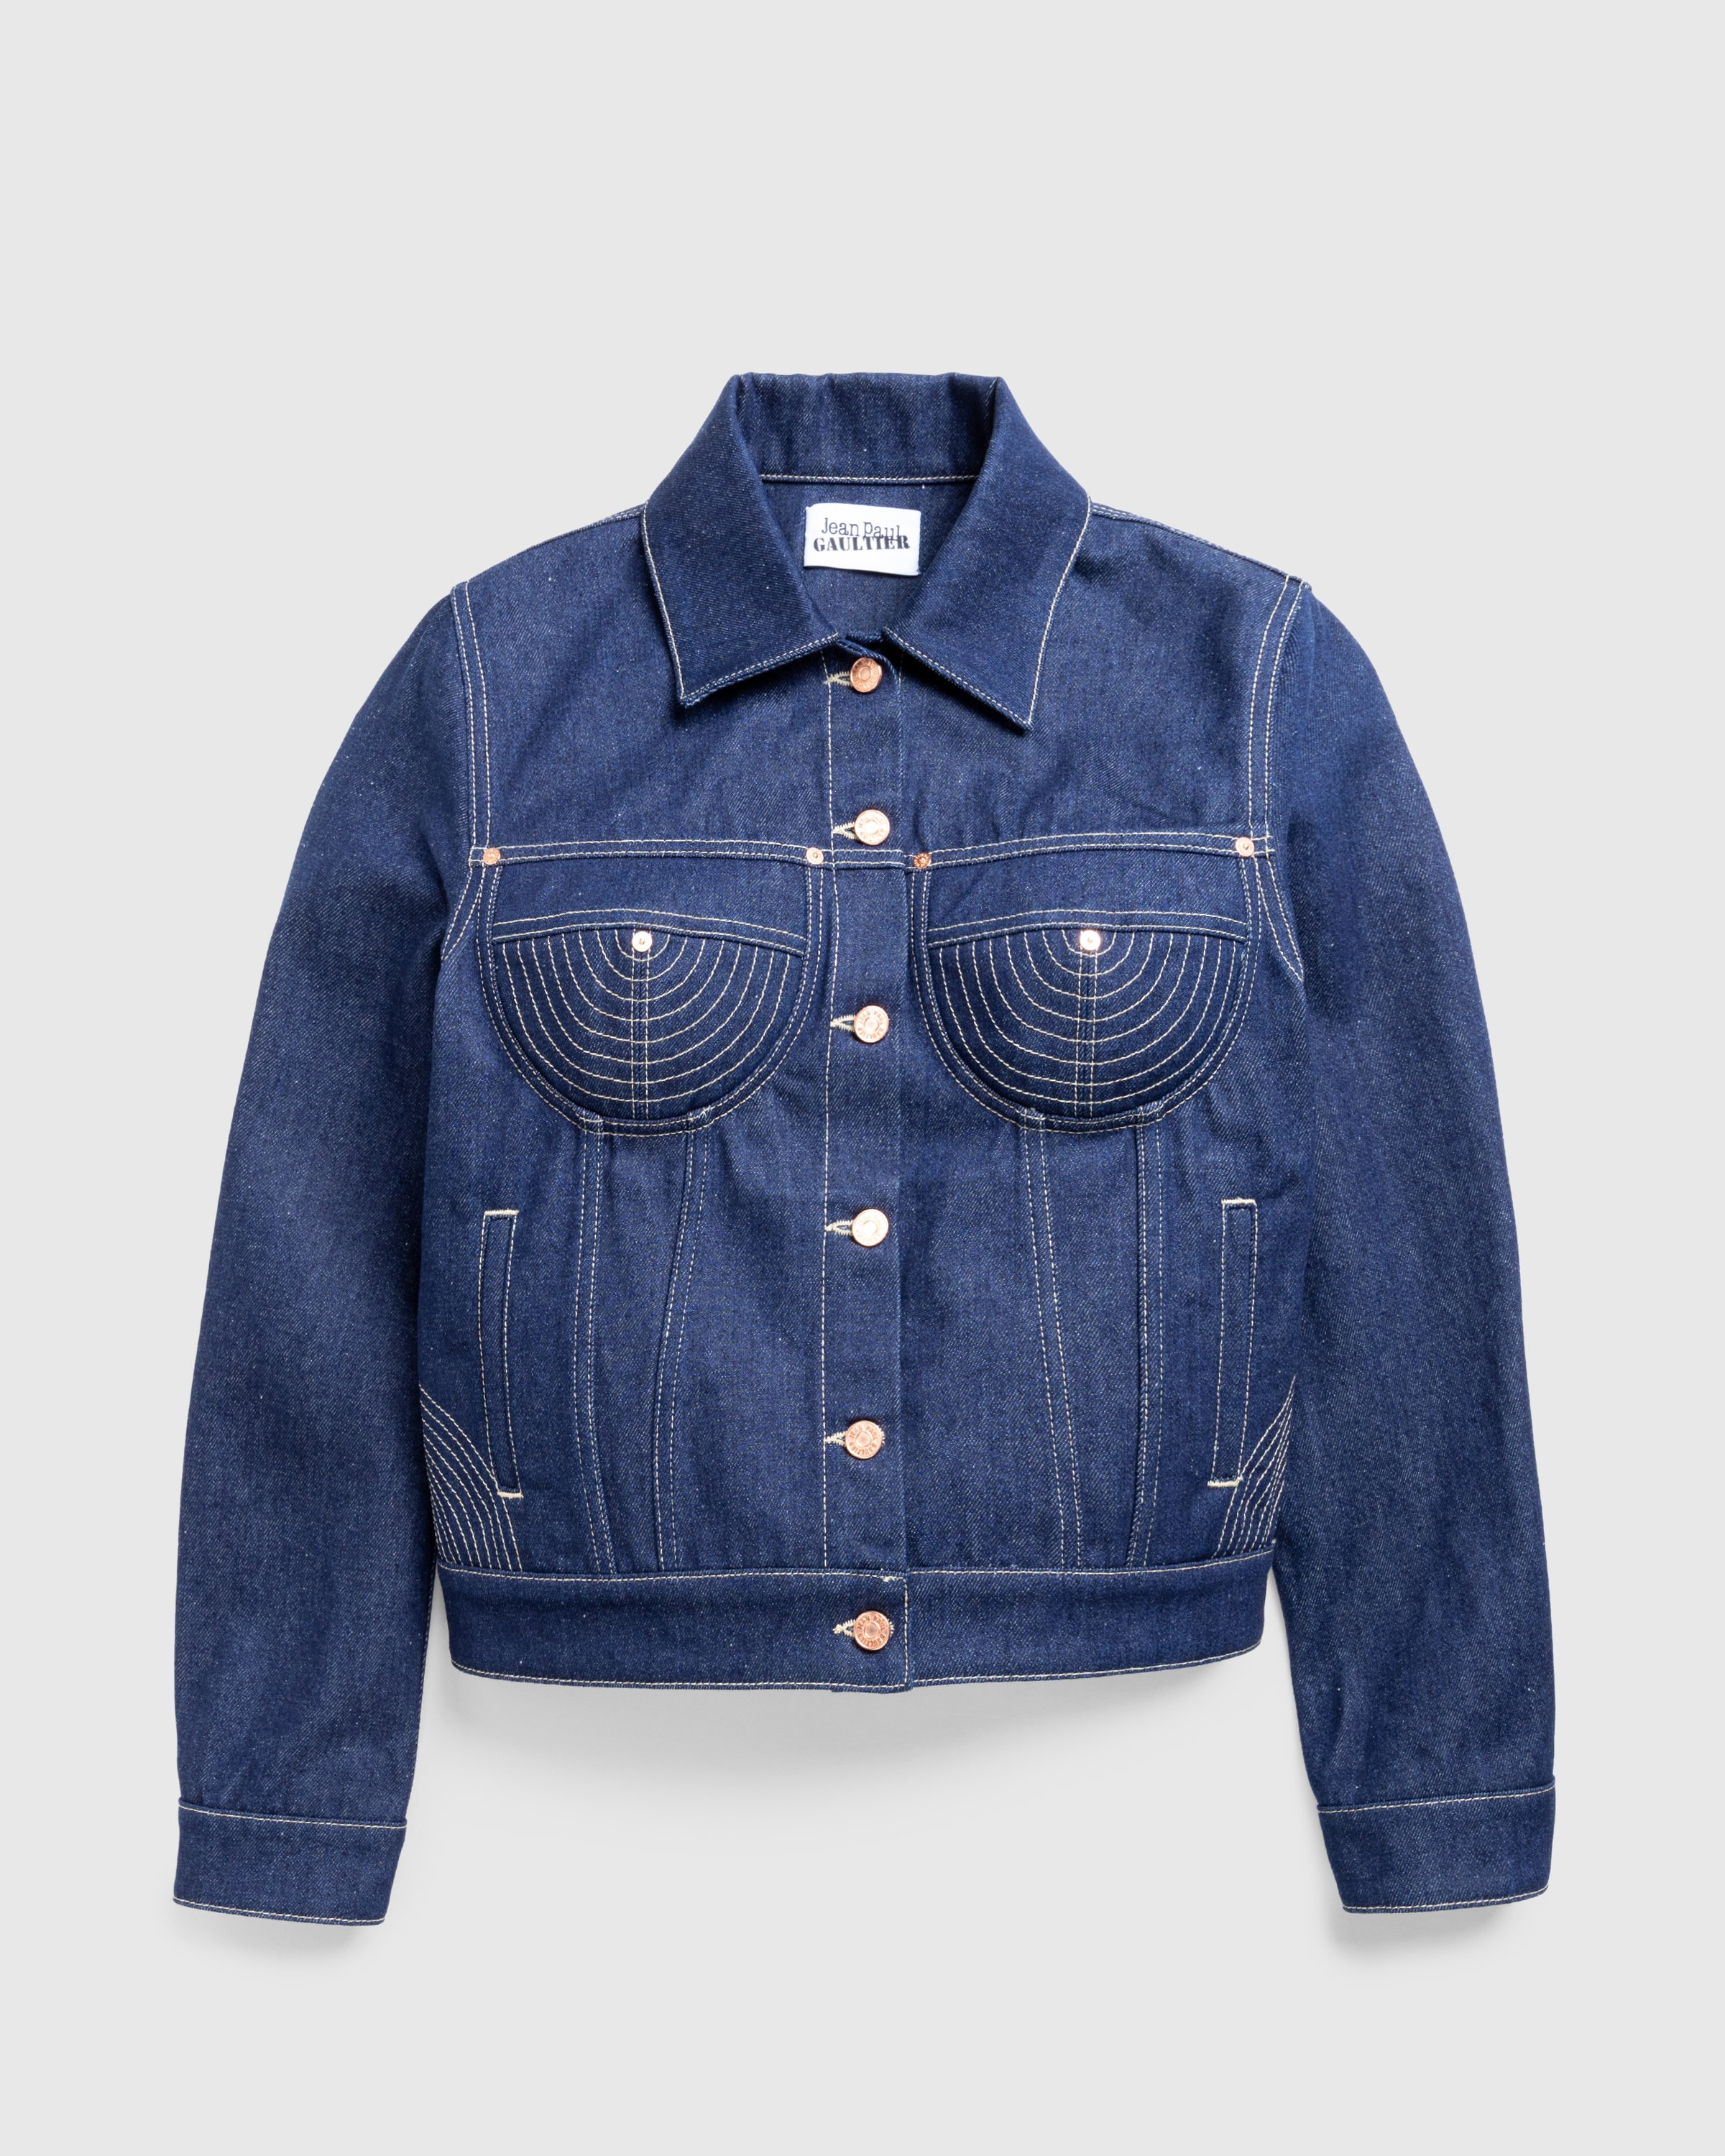 Jean Paul Gaultier - Denim Jacket With Contrasted Topstitching Madonna Inspired Indigo/Tabac - Clothing - Multi - Image 1